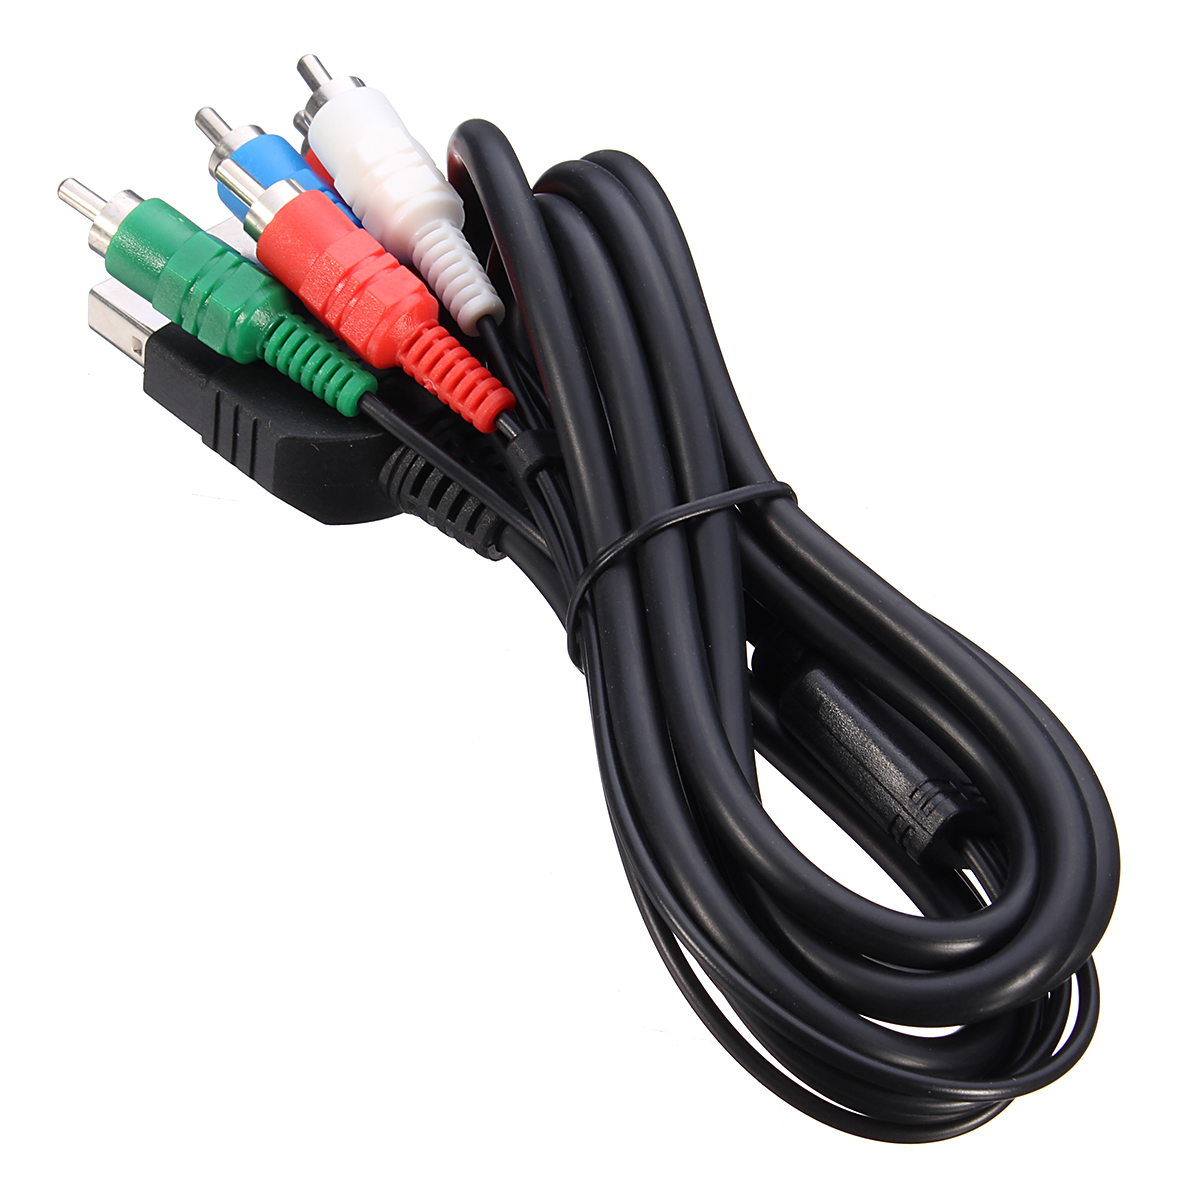 HD TV Component Composite 5 RCA AC Stereo Sound Audio Video Cable Cord for XBOX 31